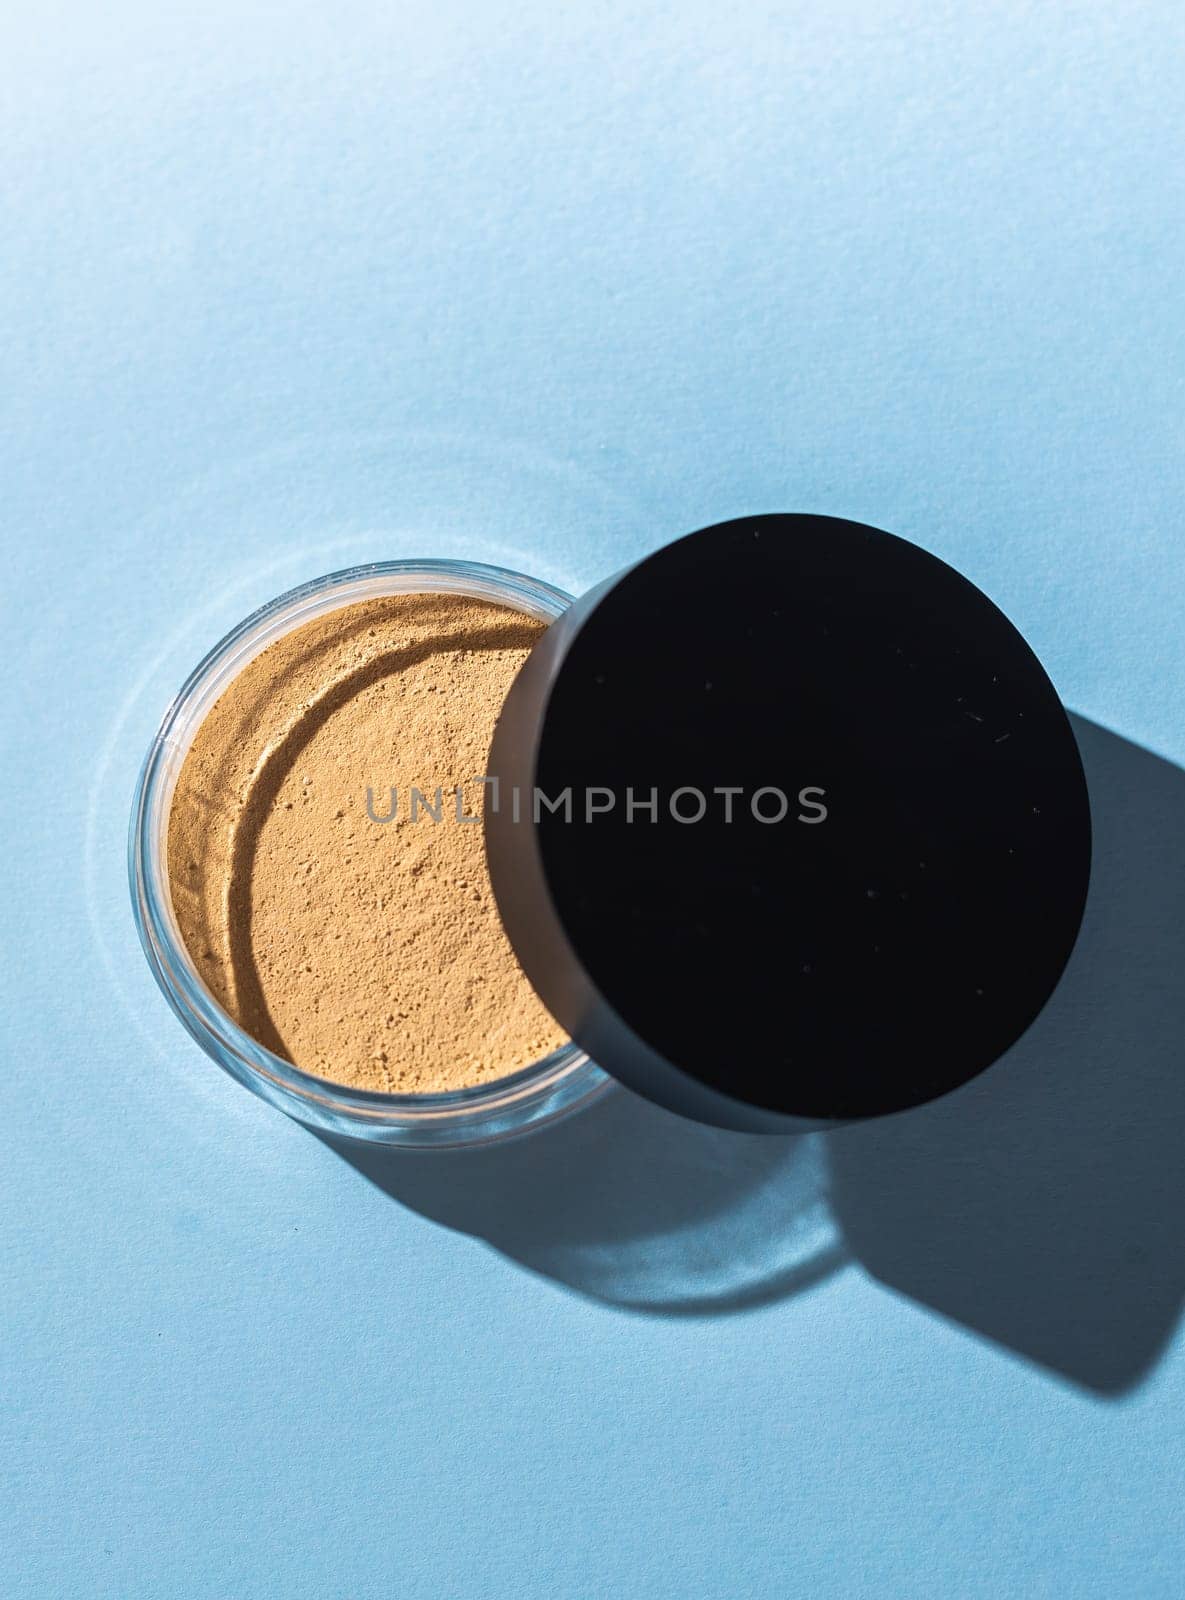 Mineral powder foundation isolated on a white background. Eco-friendly and organic beauty products.